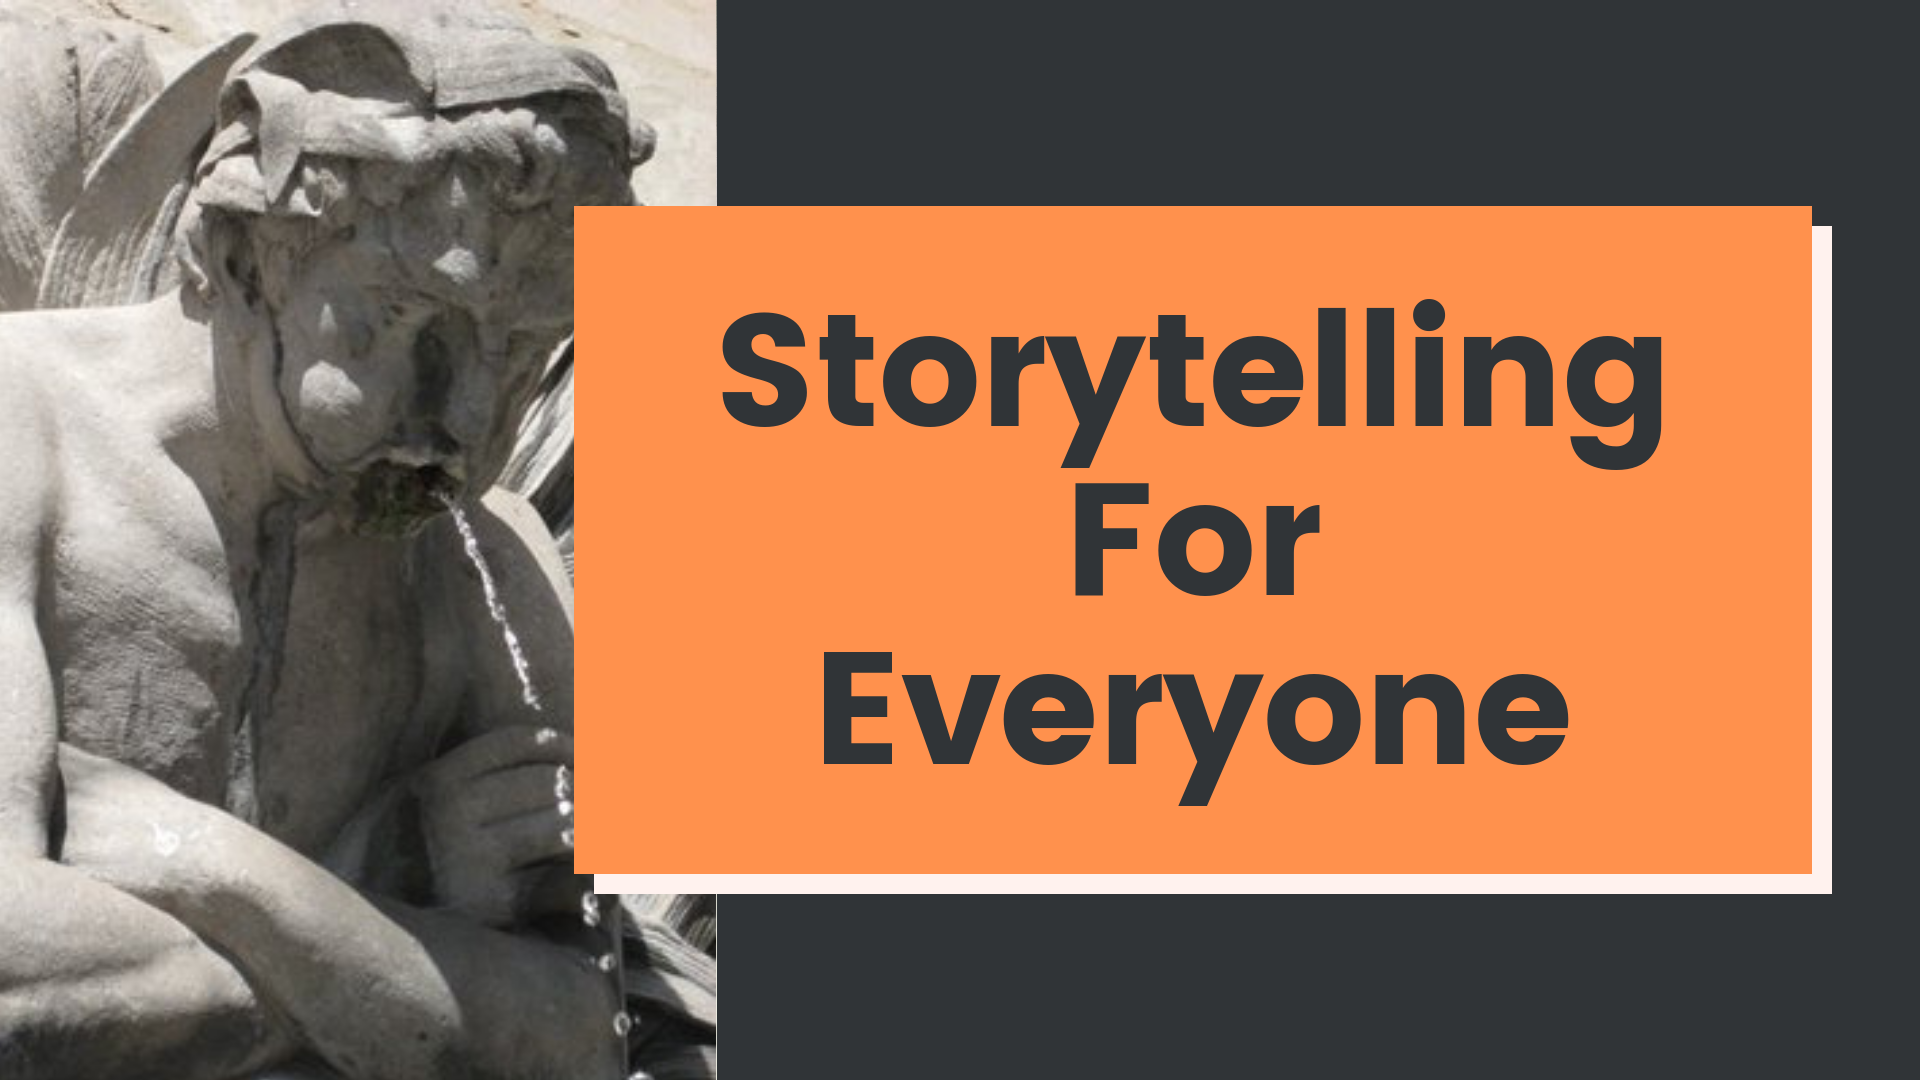 Storytelling For Everyone: A Four Week Course in Personal Narrative (ONLINE - MONDAYS IN JANUARY)